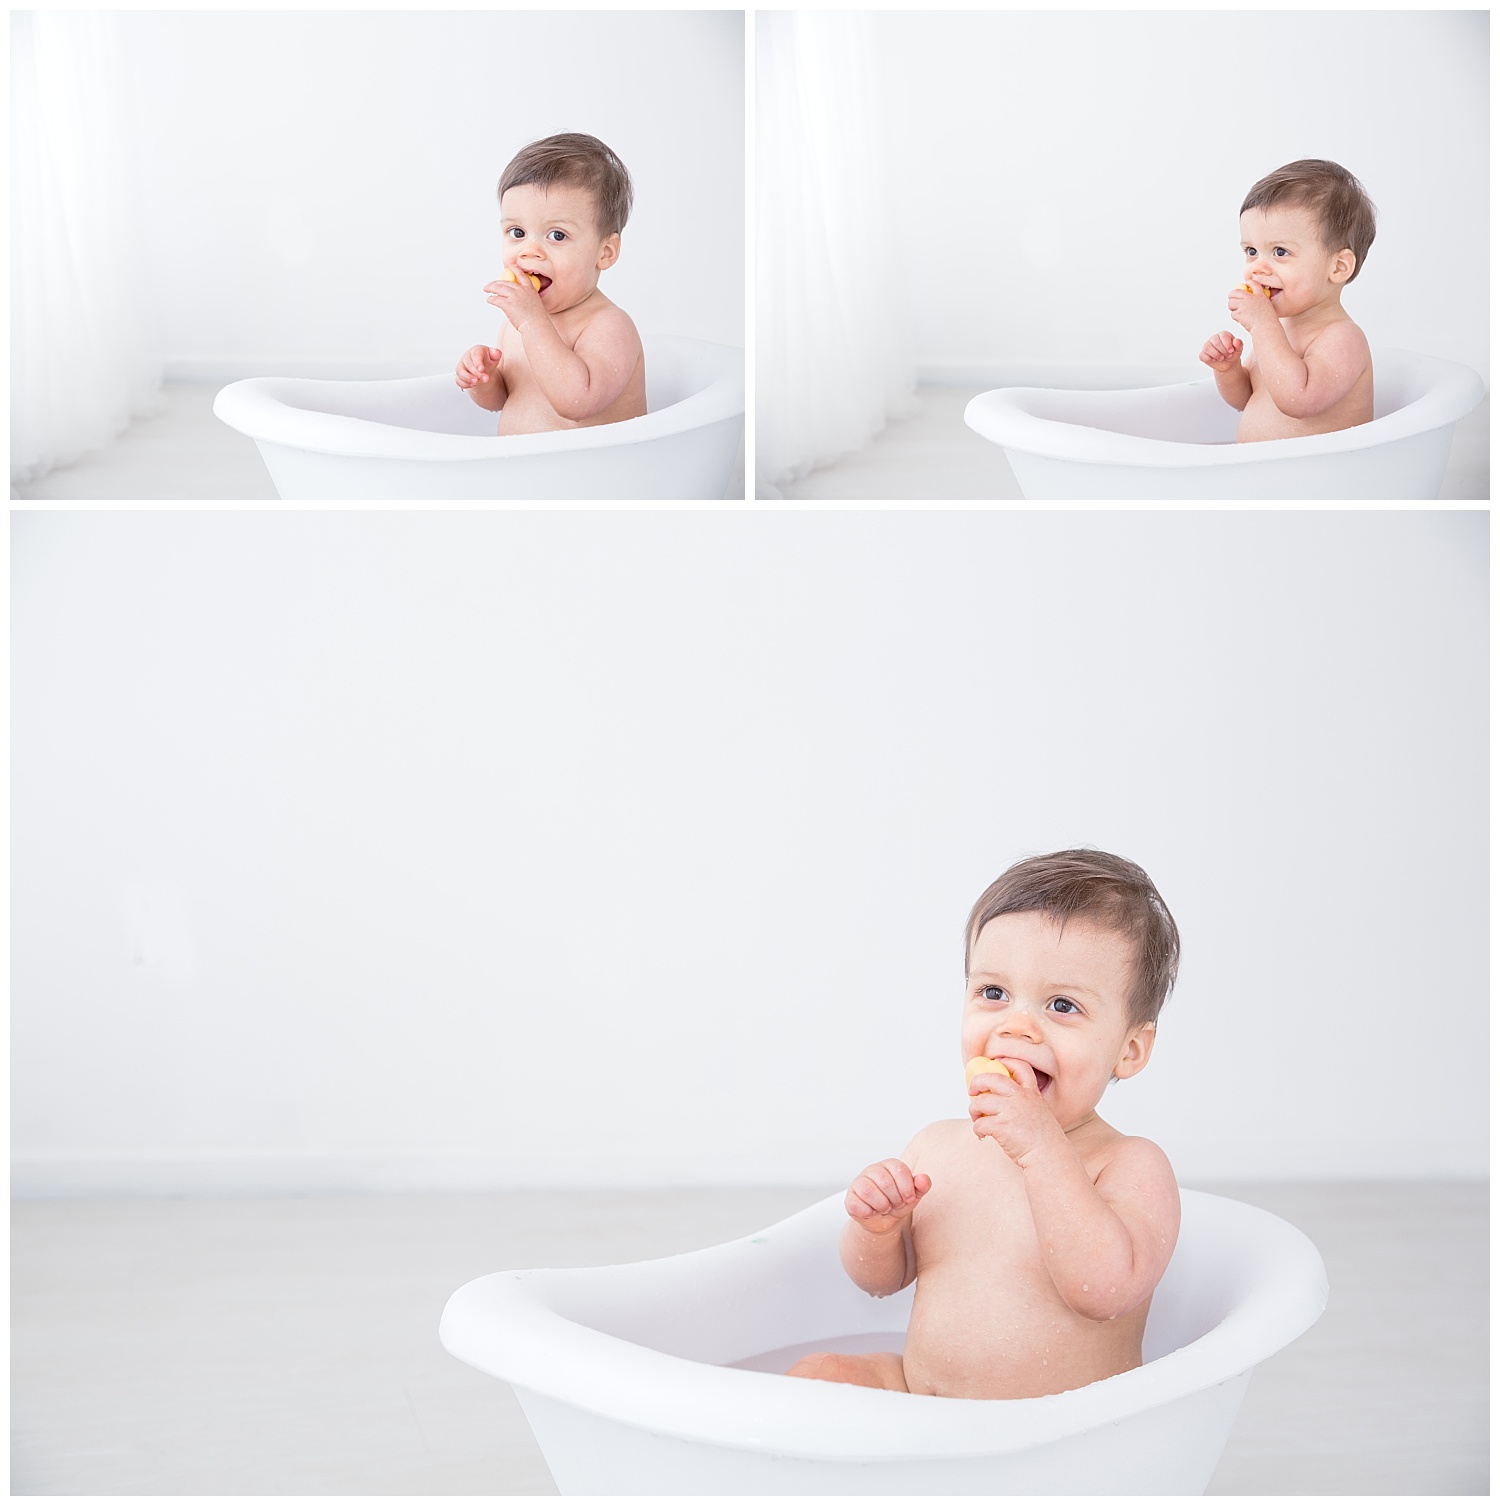 little boy laughing and splashing in the tub burington new jersey